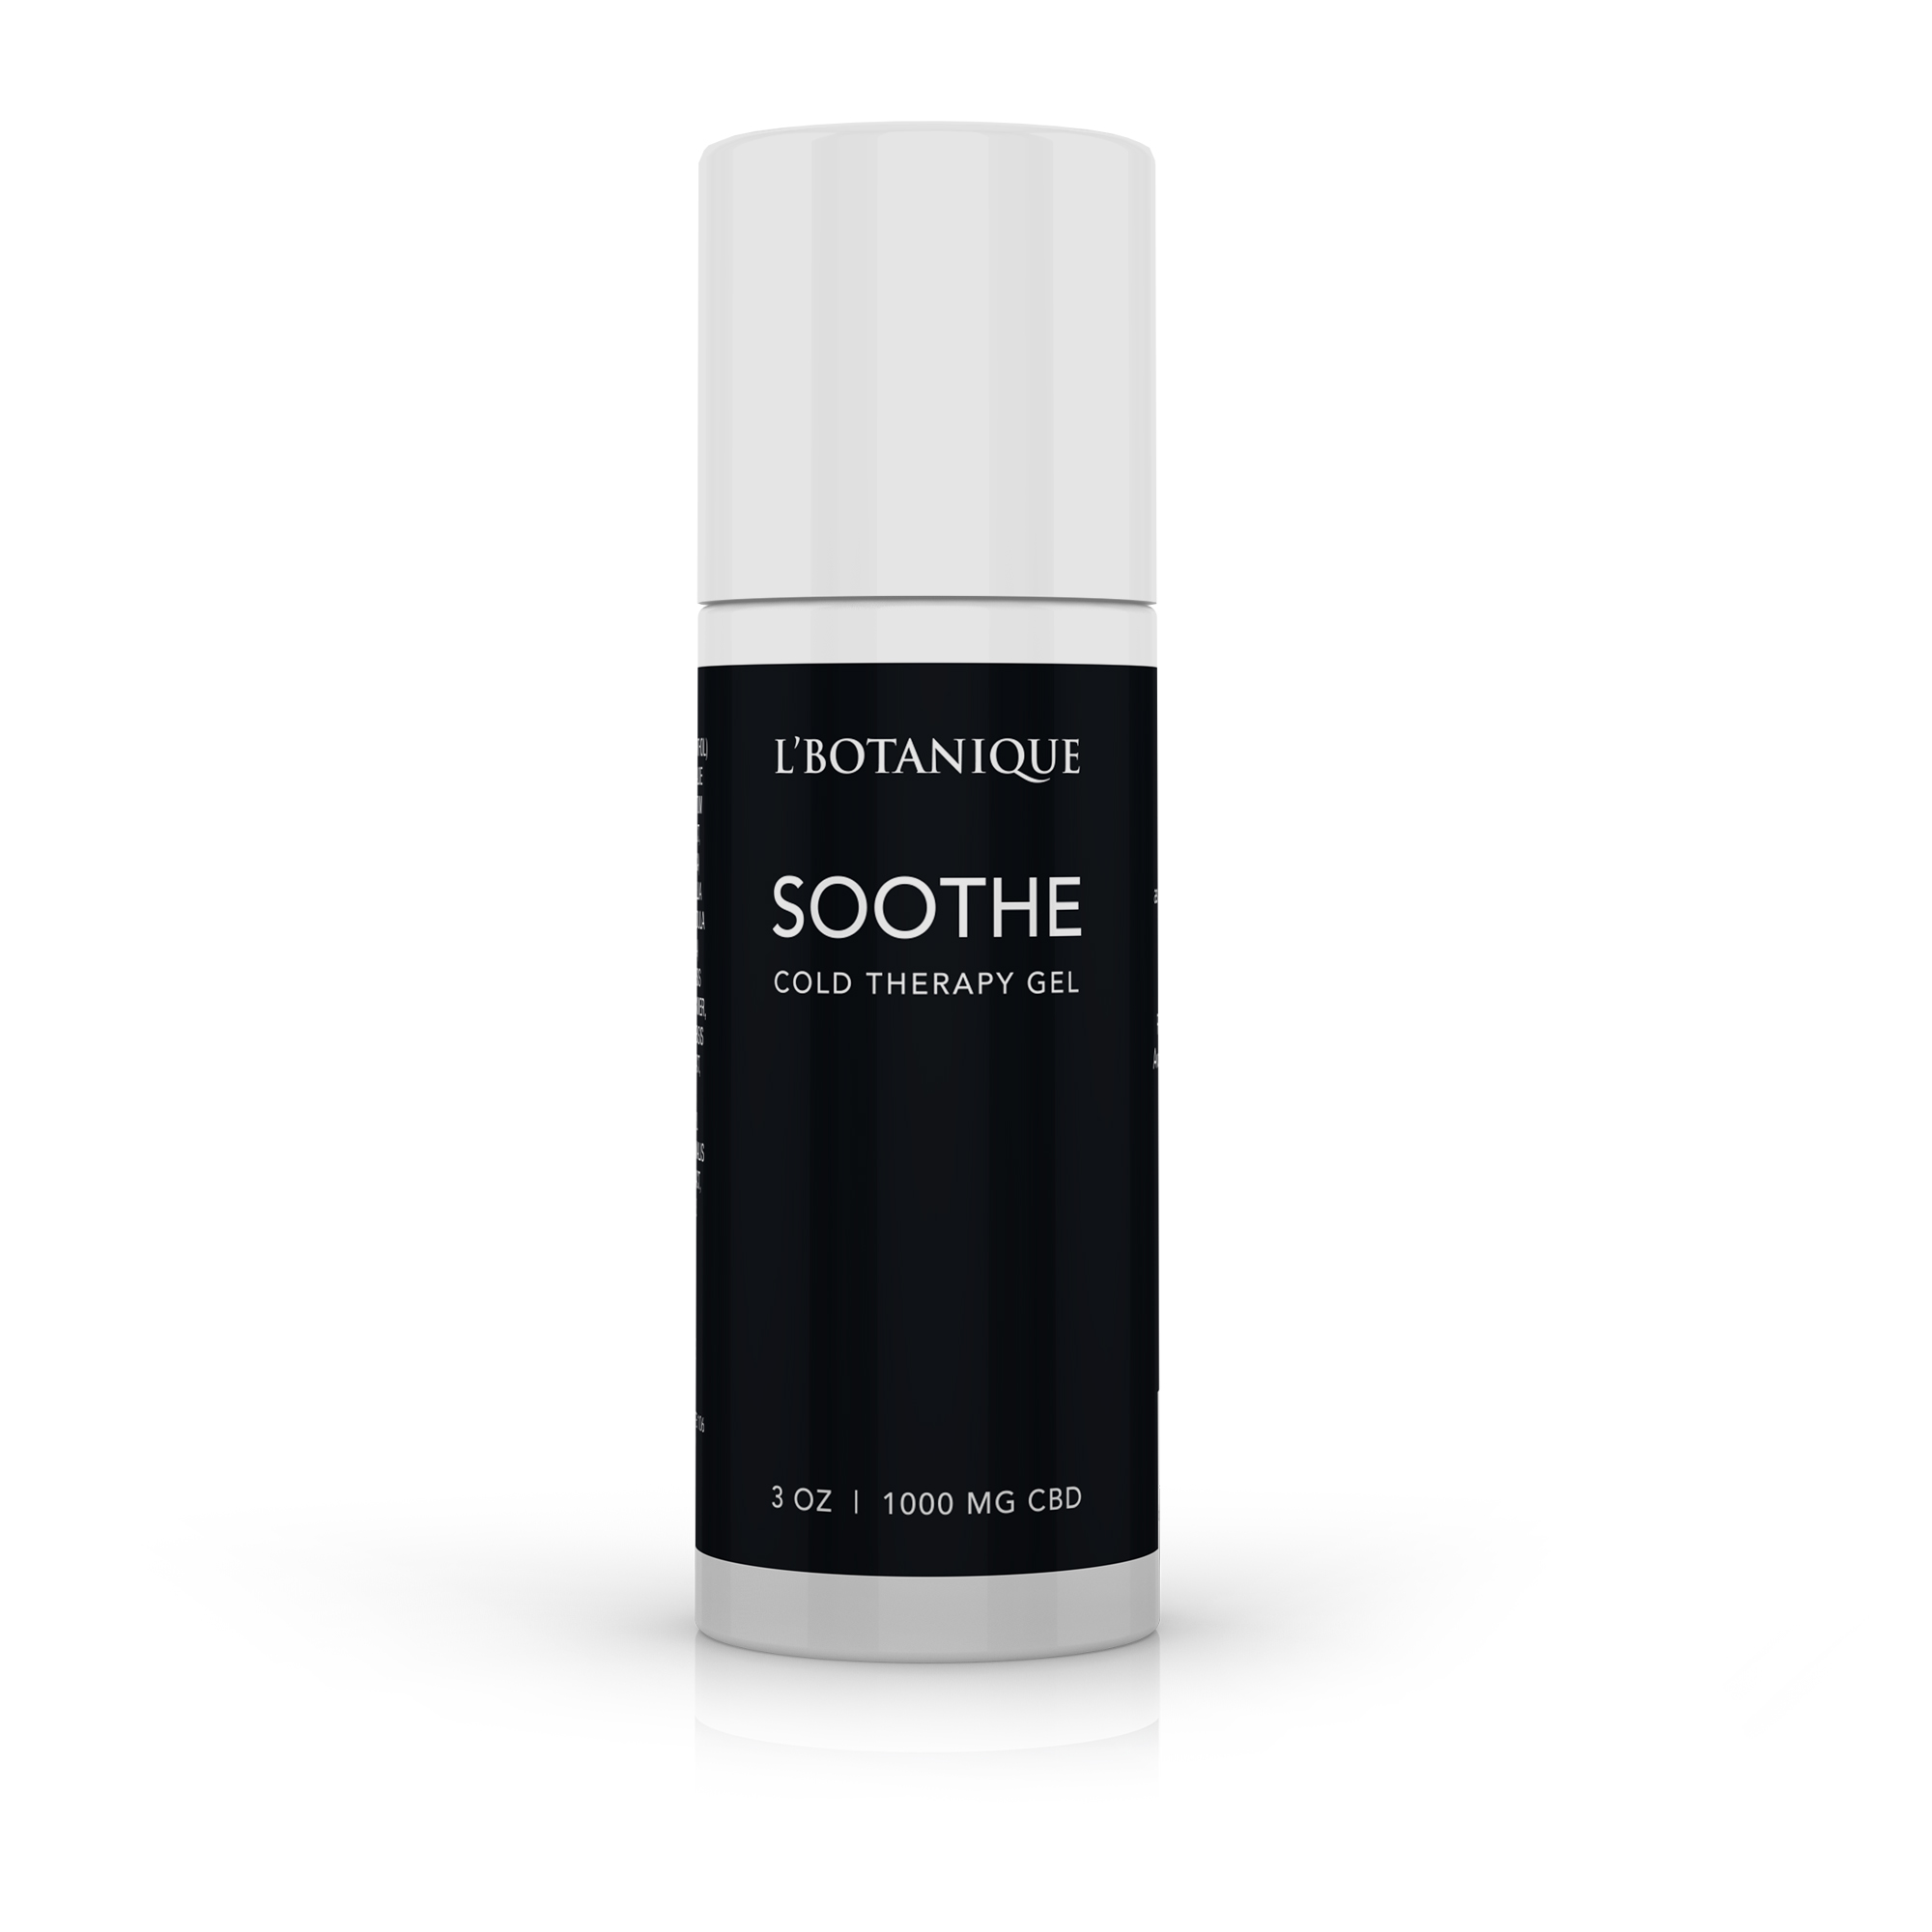 LBotanique-Soothe-1000mg-CBD-Cold-Therapy-Gel